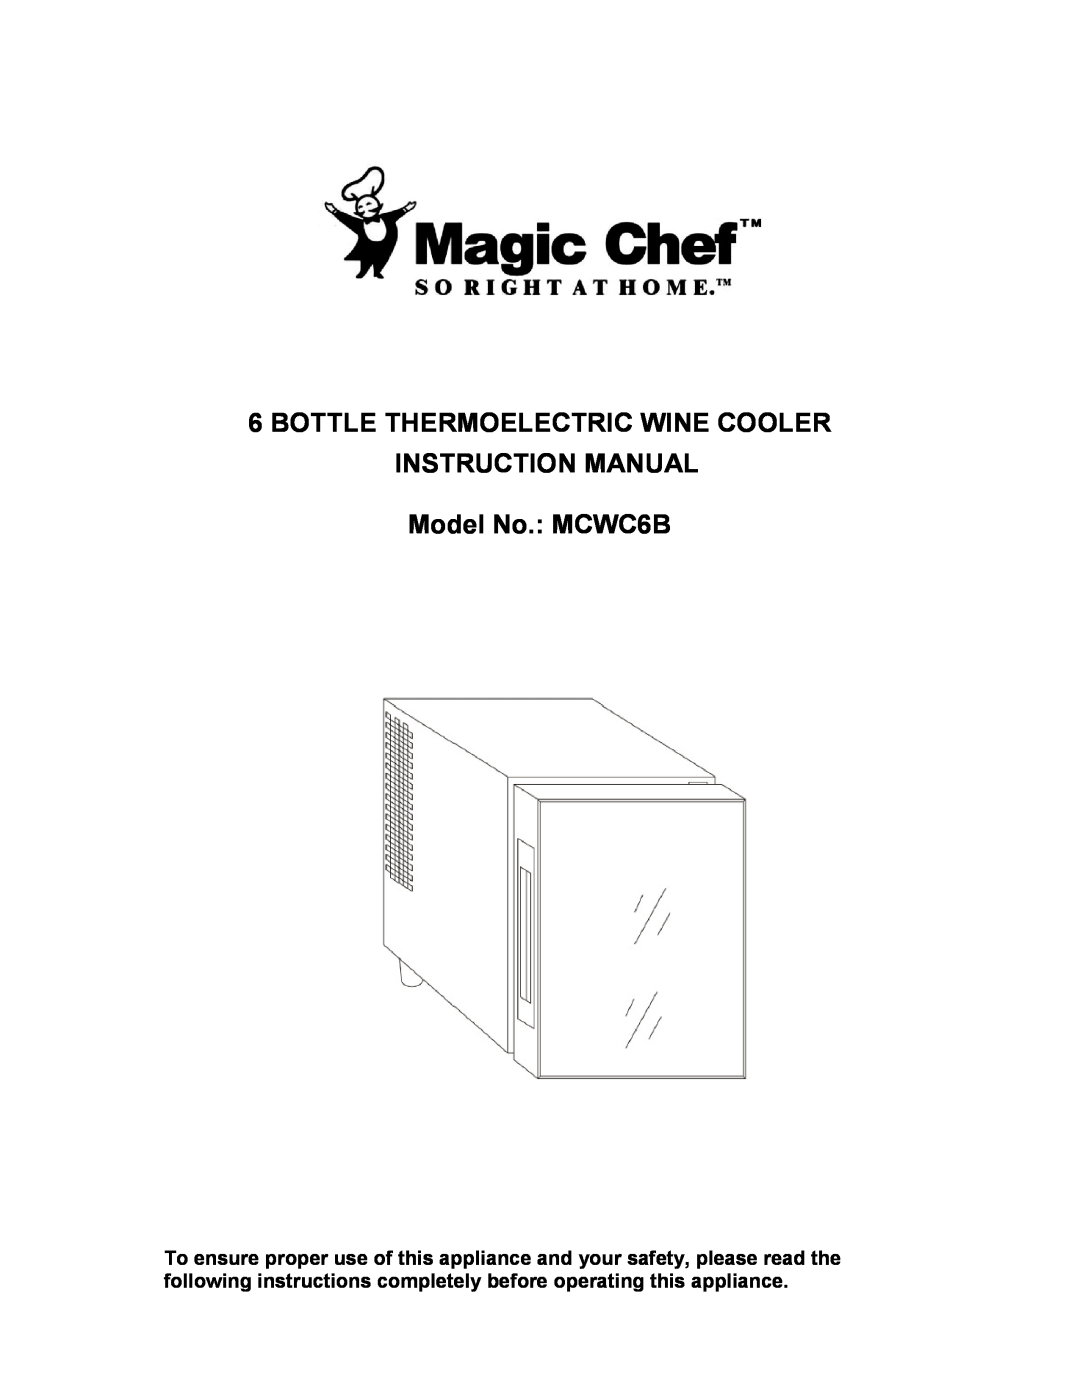 Magic Chef MCWC6B instruction manual Bottle Thermoelectric Wine Cooler 